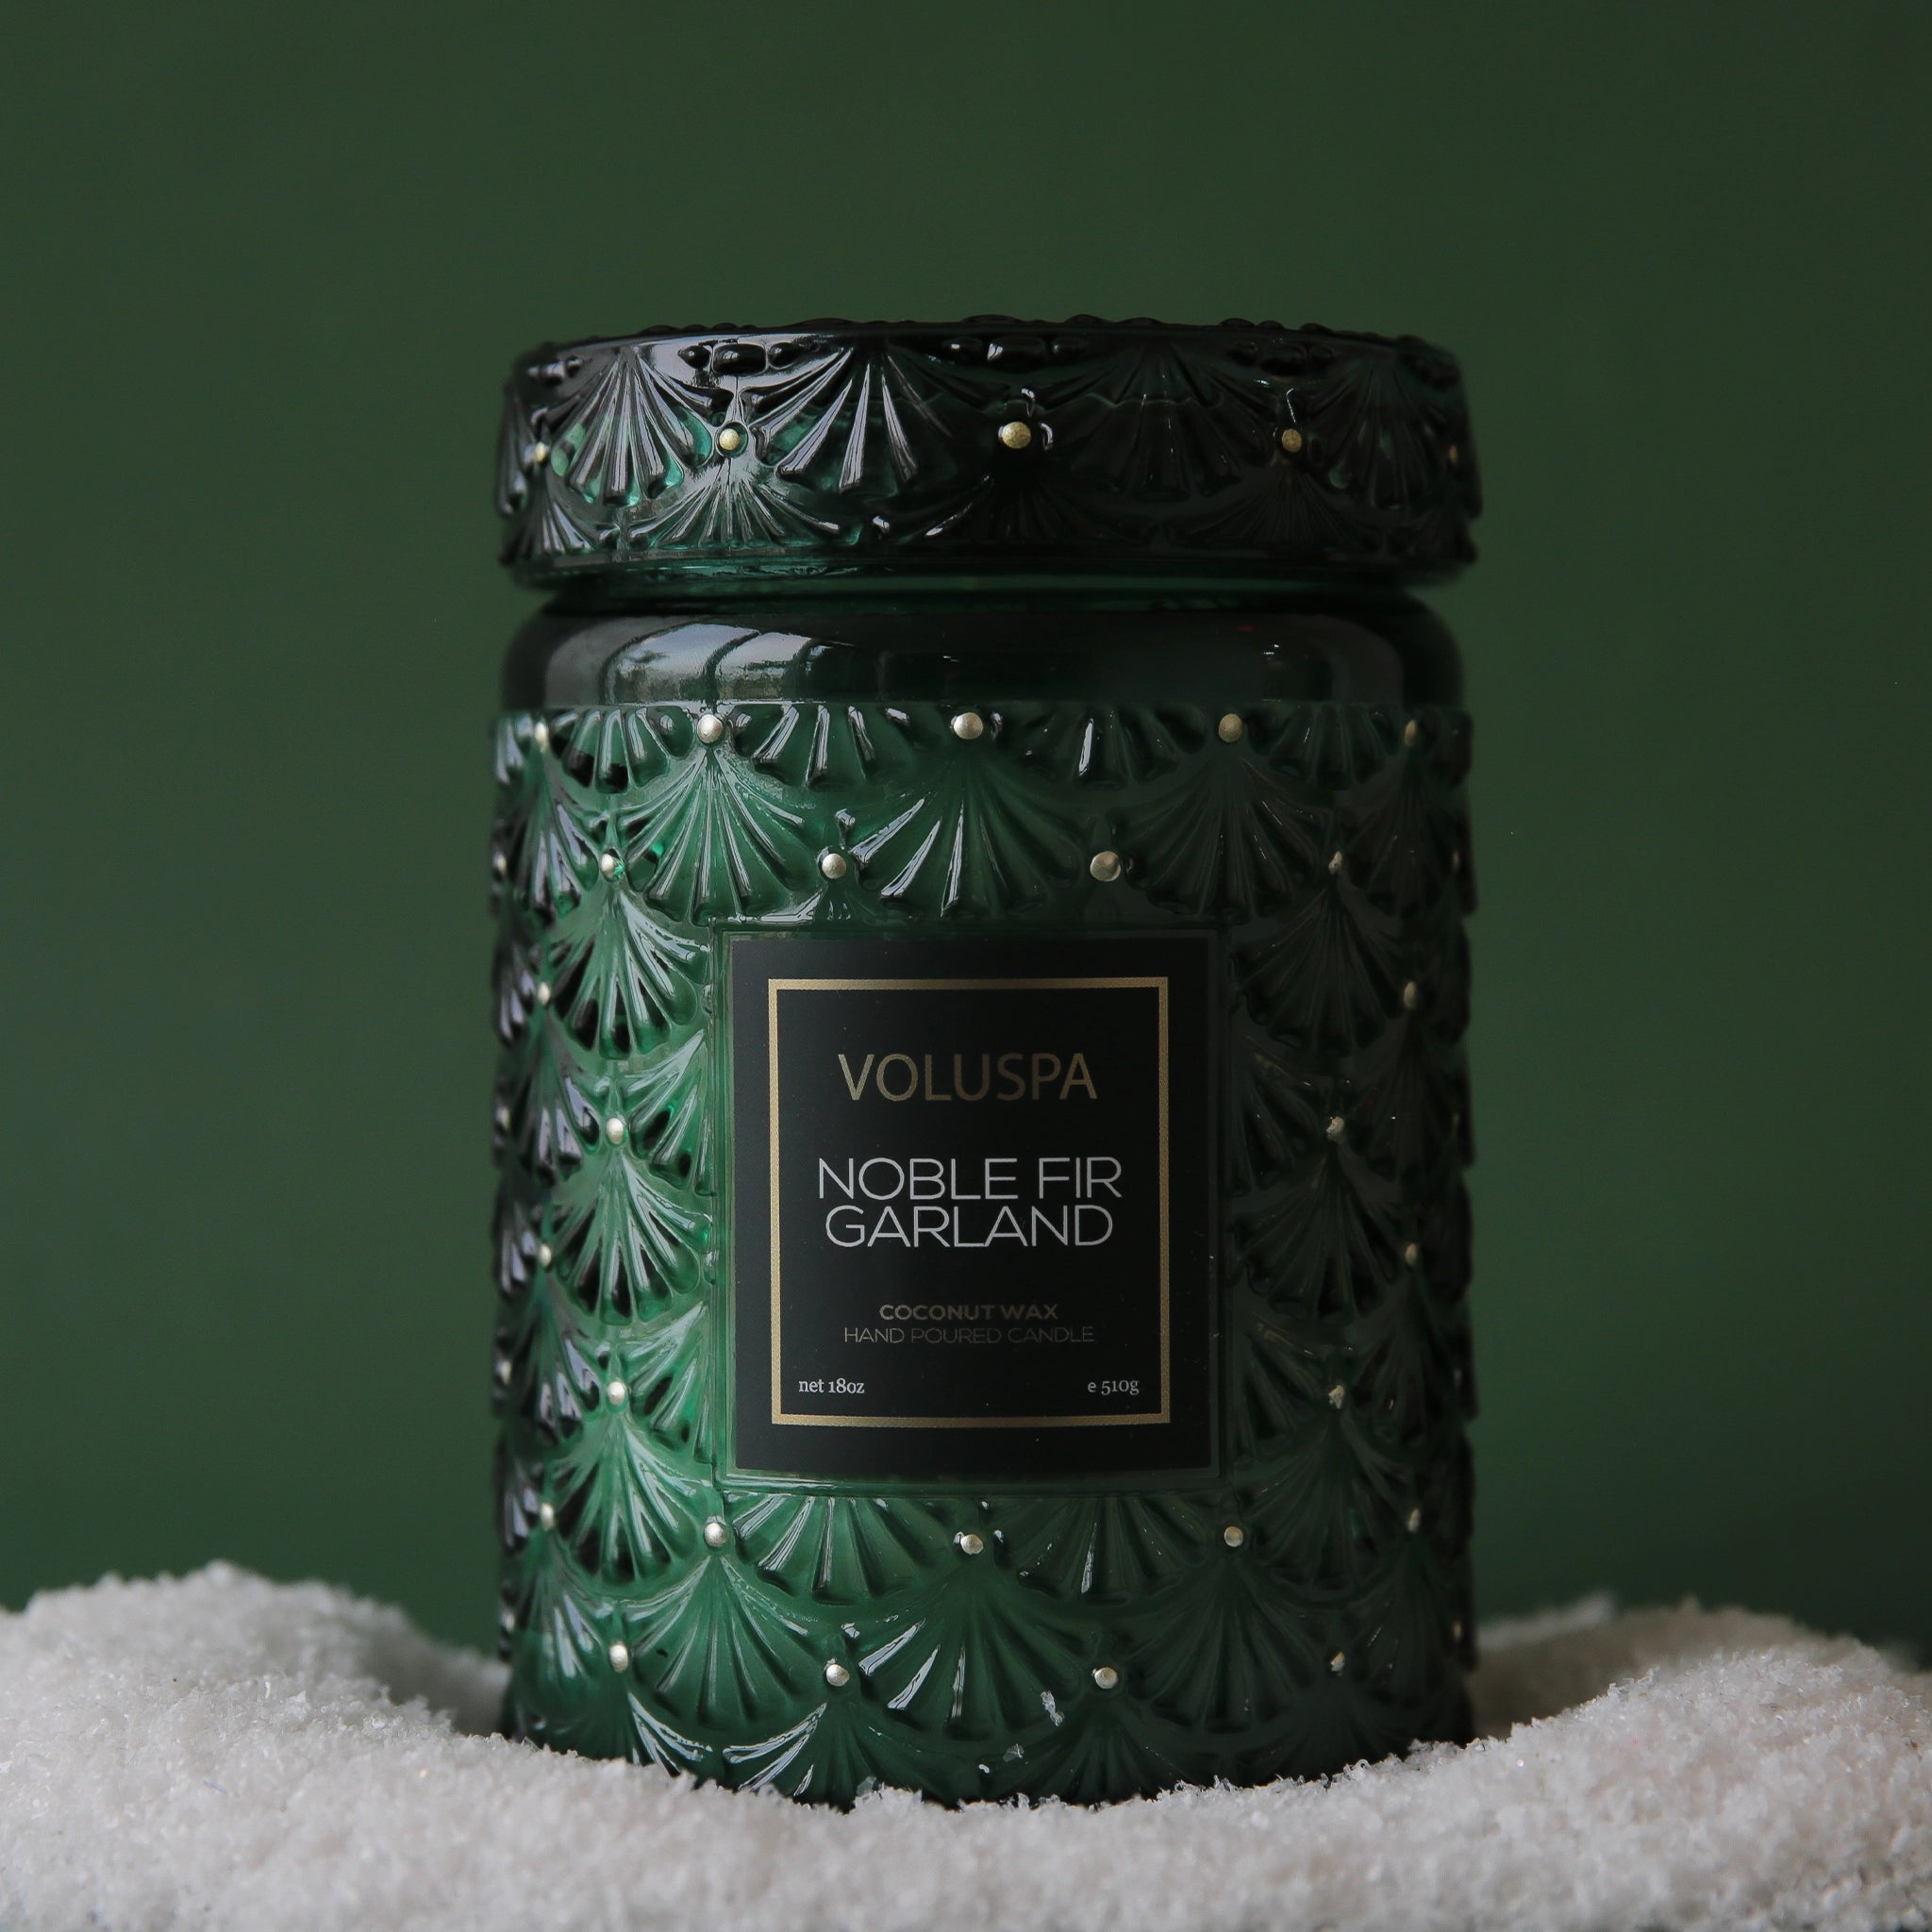 On a green background is a dark green decorative glass jar candle with gold dot details and a label in the center that reads, &quot;Noble Fir Garland&quot;.